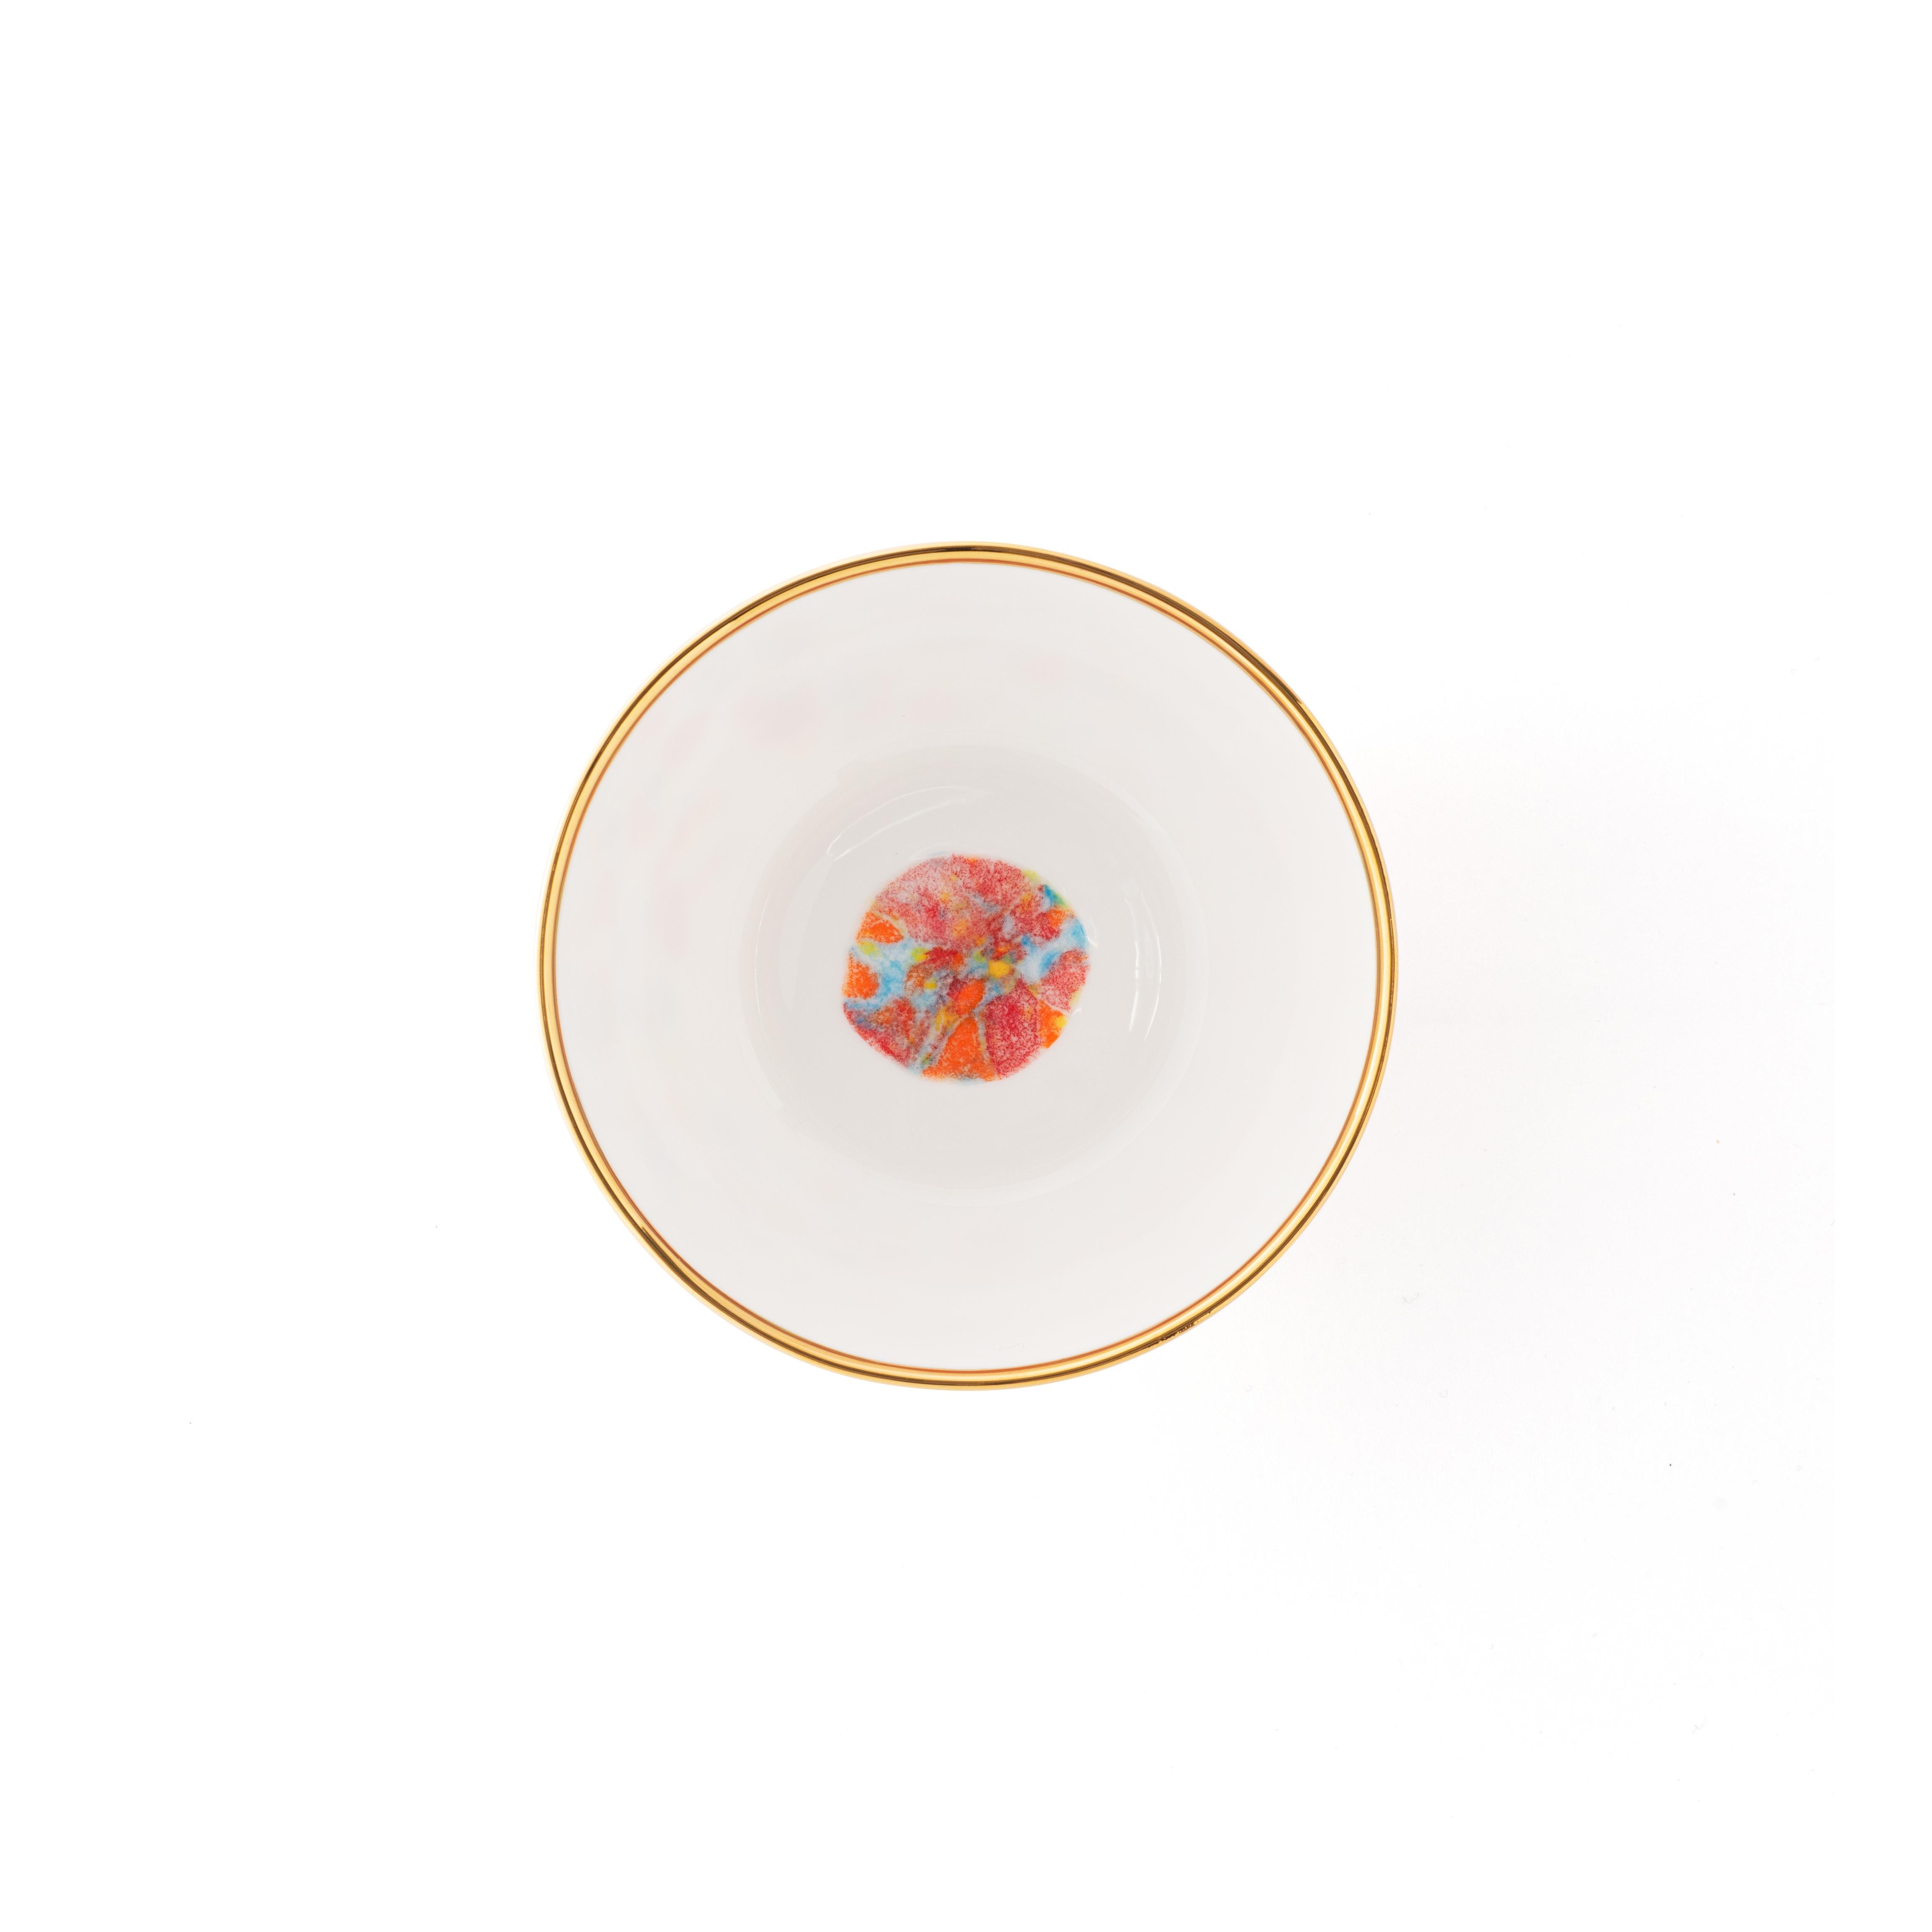 Handcrafted in Italy from the finest porcelain, these Confetti fruit bowls are decorated outside with a lively multi-color decor crowned by an elegant golden rim; the inside is a brilliant white with a dotted multi-color decor at the bottom.

Set